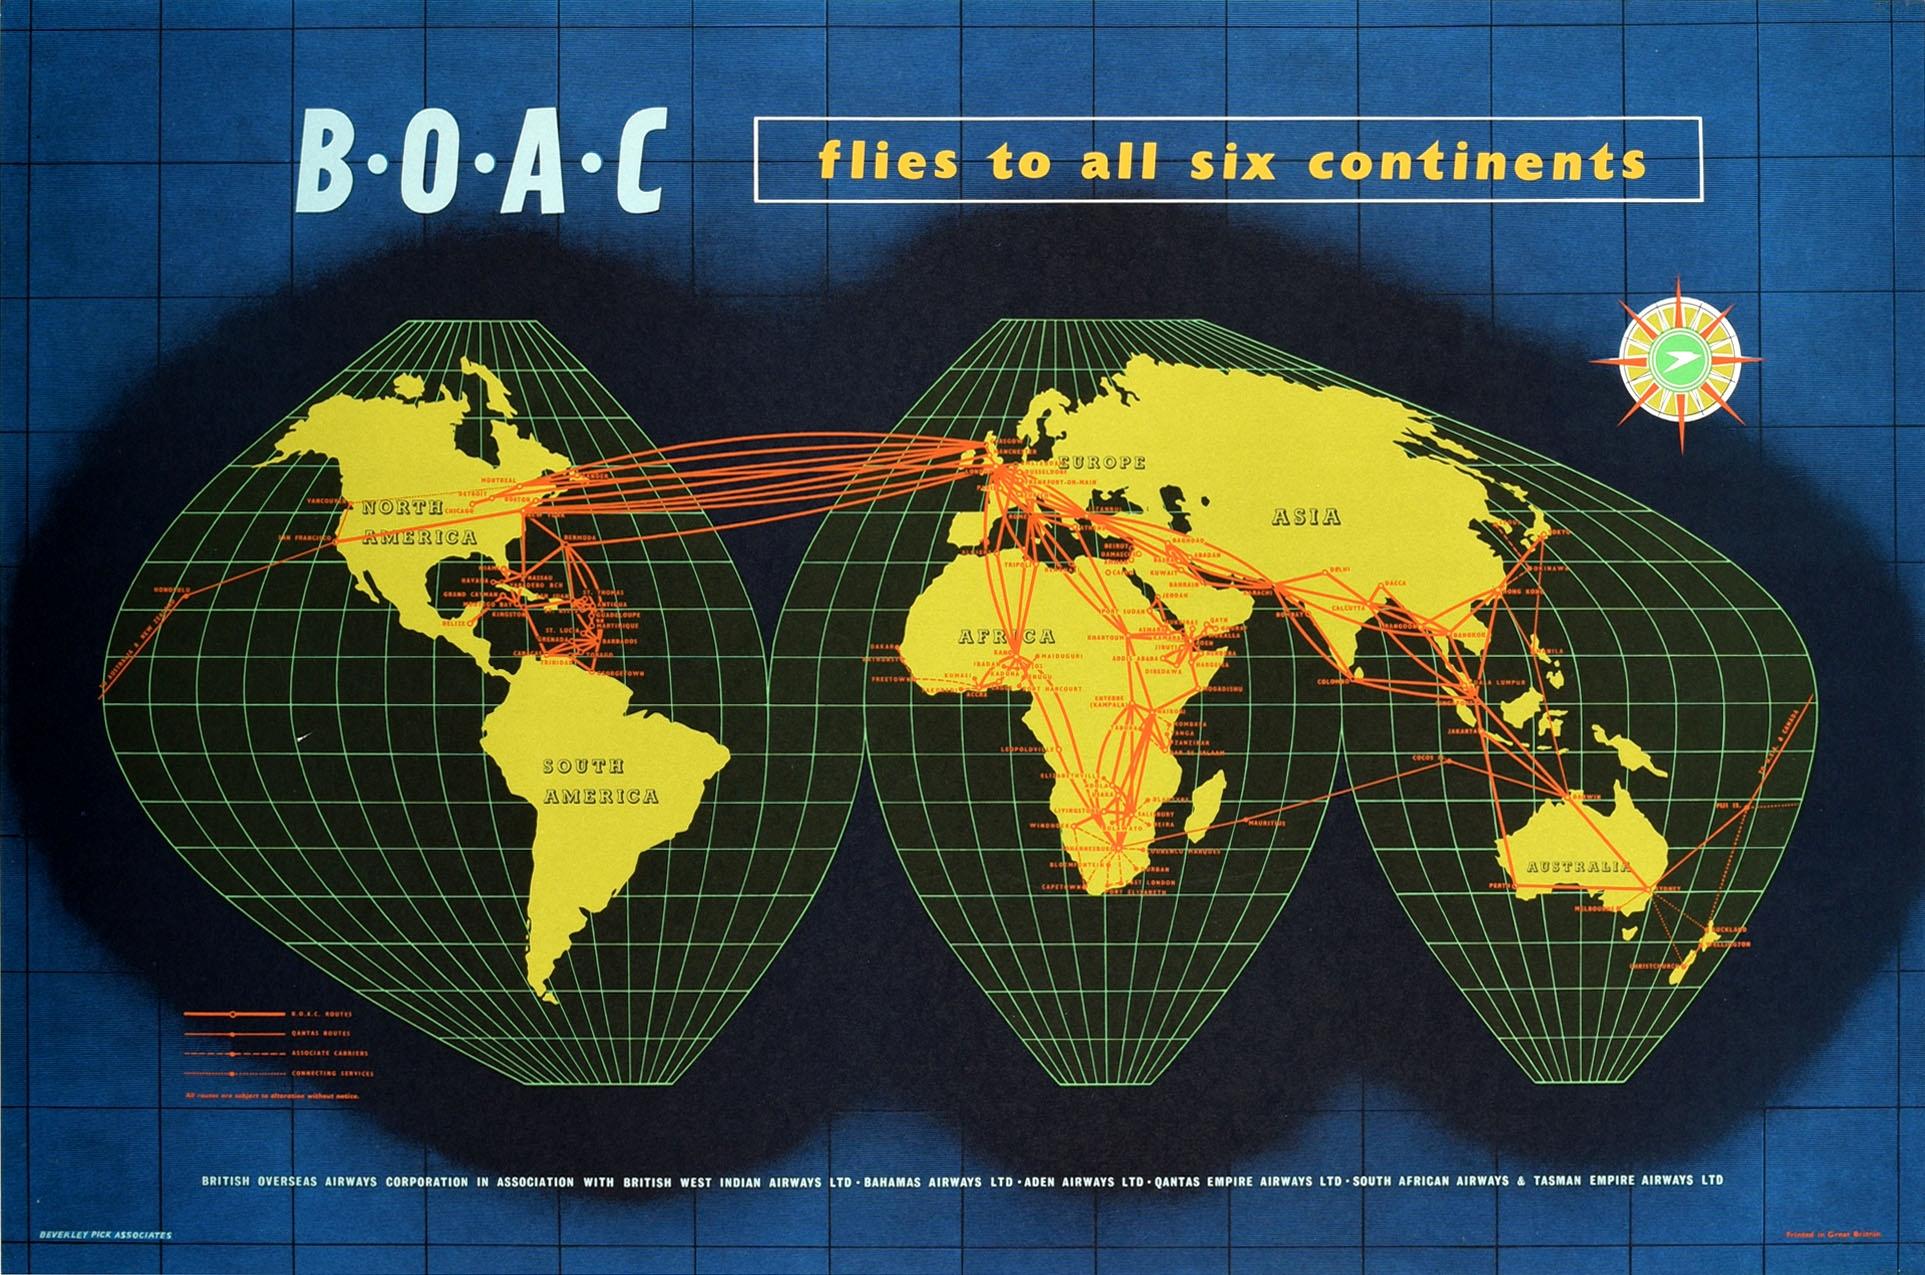 Unknown Print - Original Vintage Travel Poster BOAC Flies To All Six Continents Planisphere Map